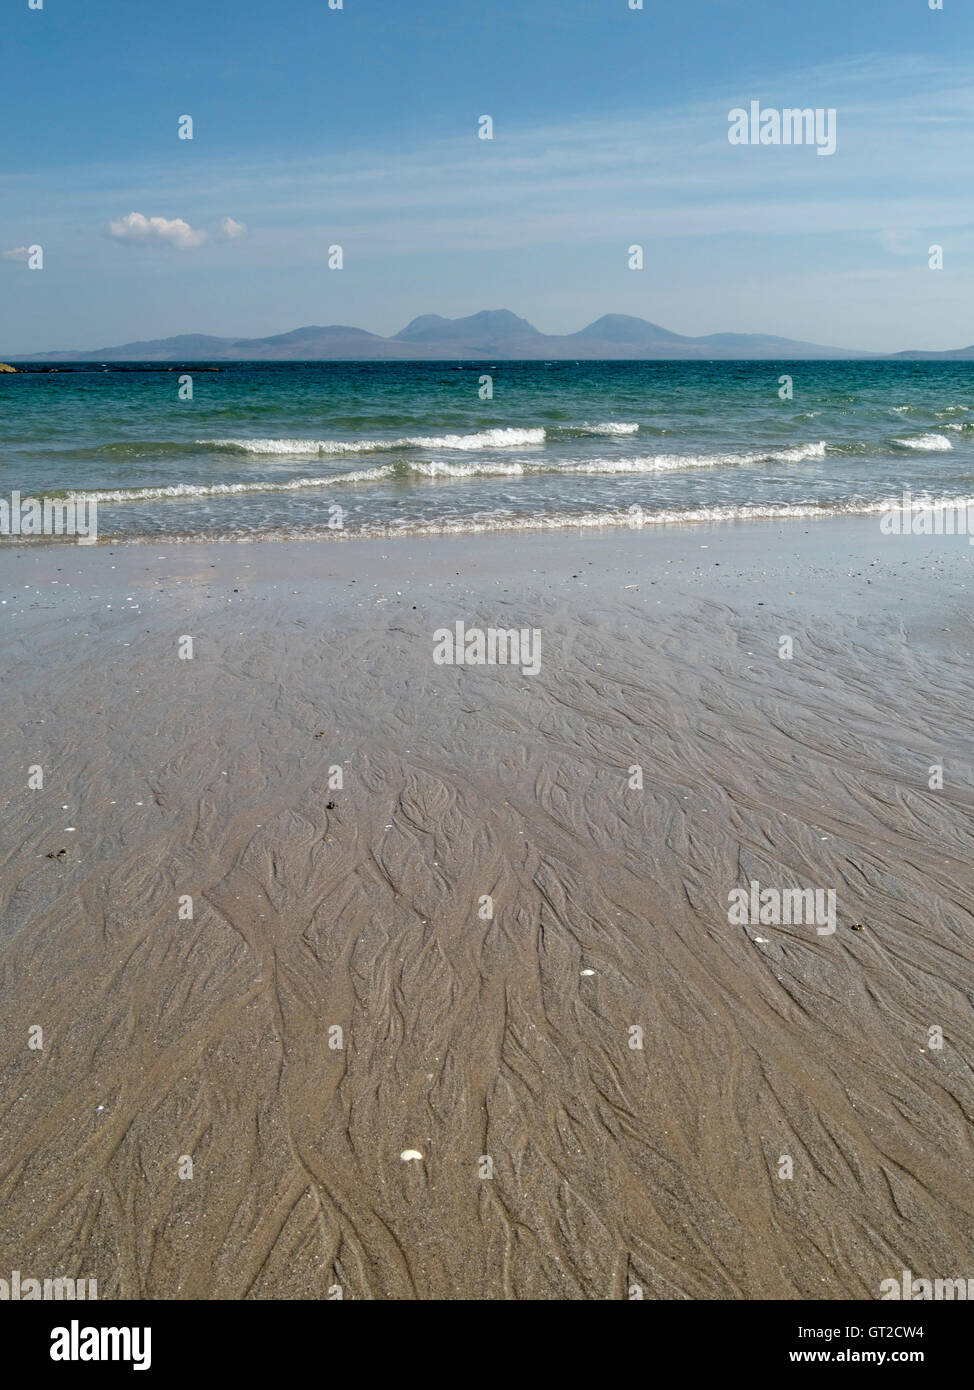 The Isle of Jura seen from sandy beach at The Strand on the Hebridean Island of Colonsay, Scotland, UK. Stock Photo